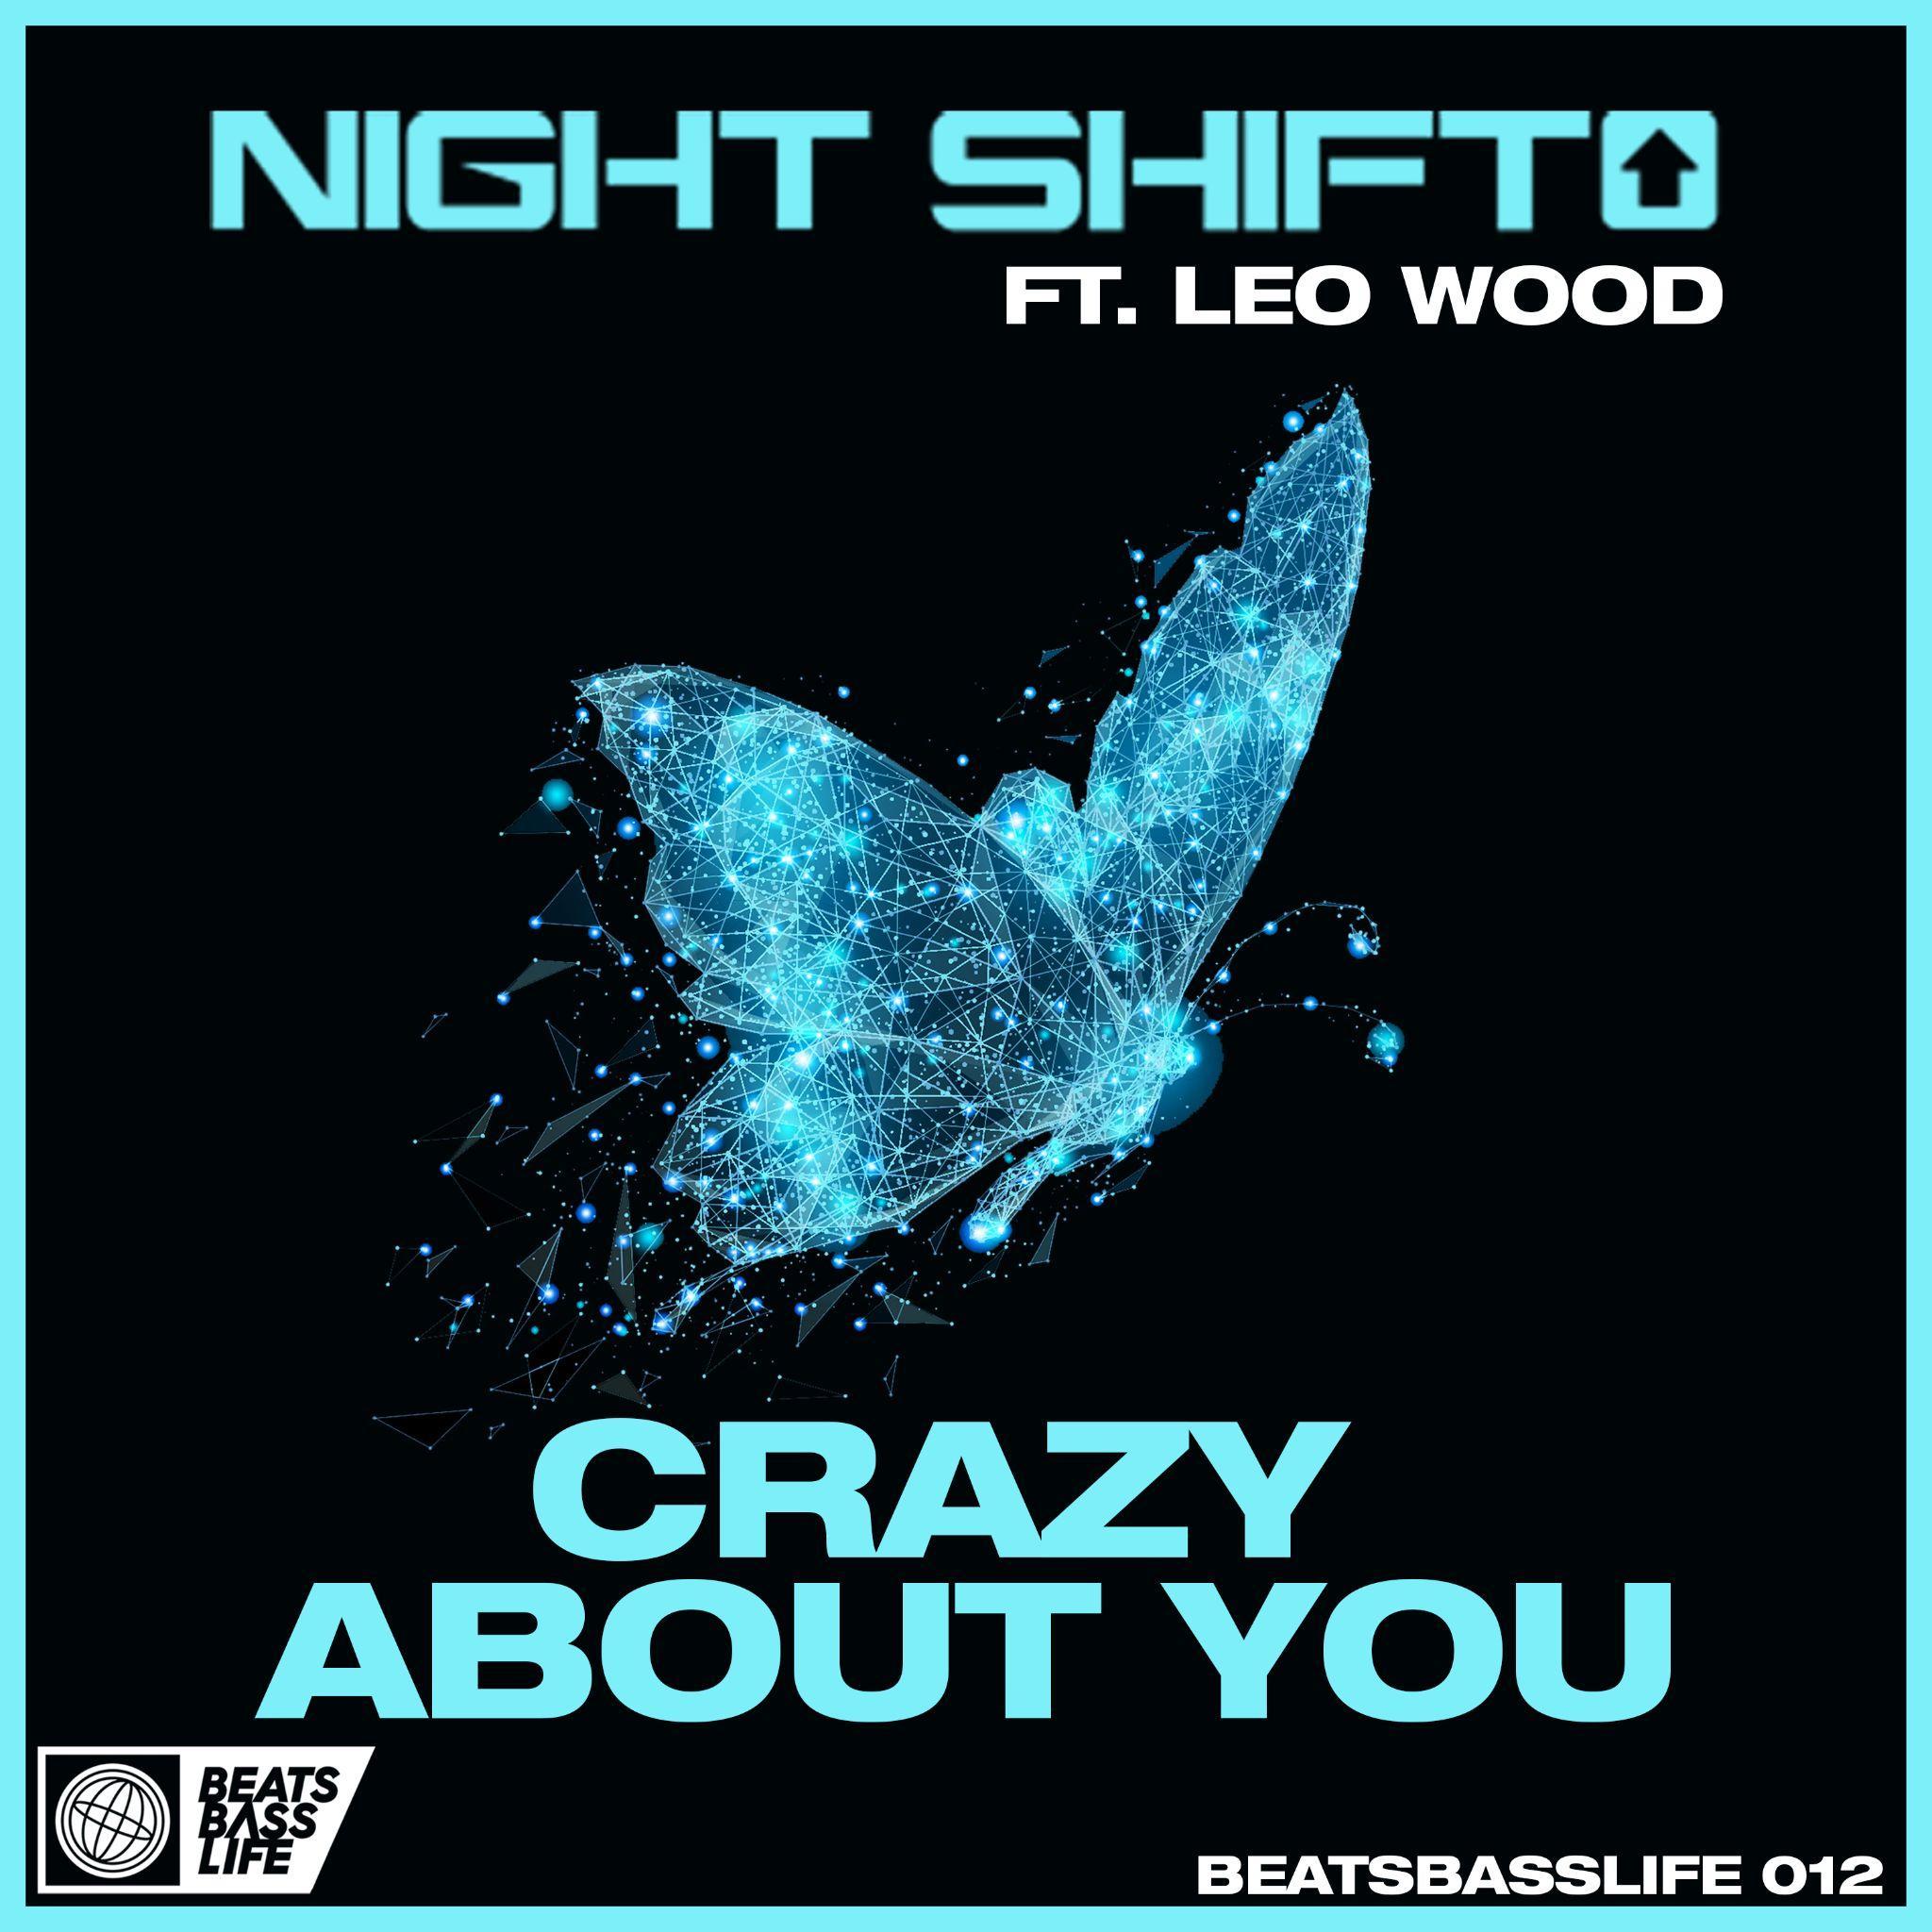 Night Shift Crazy About You